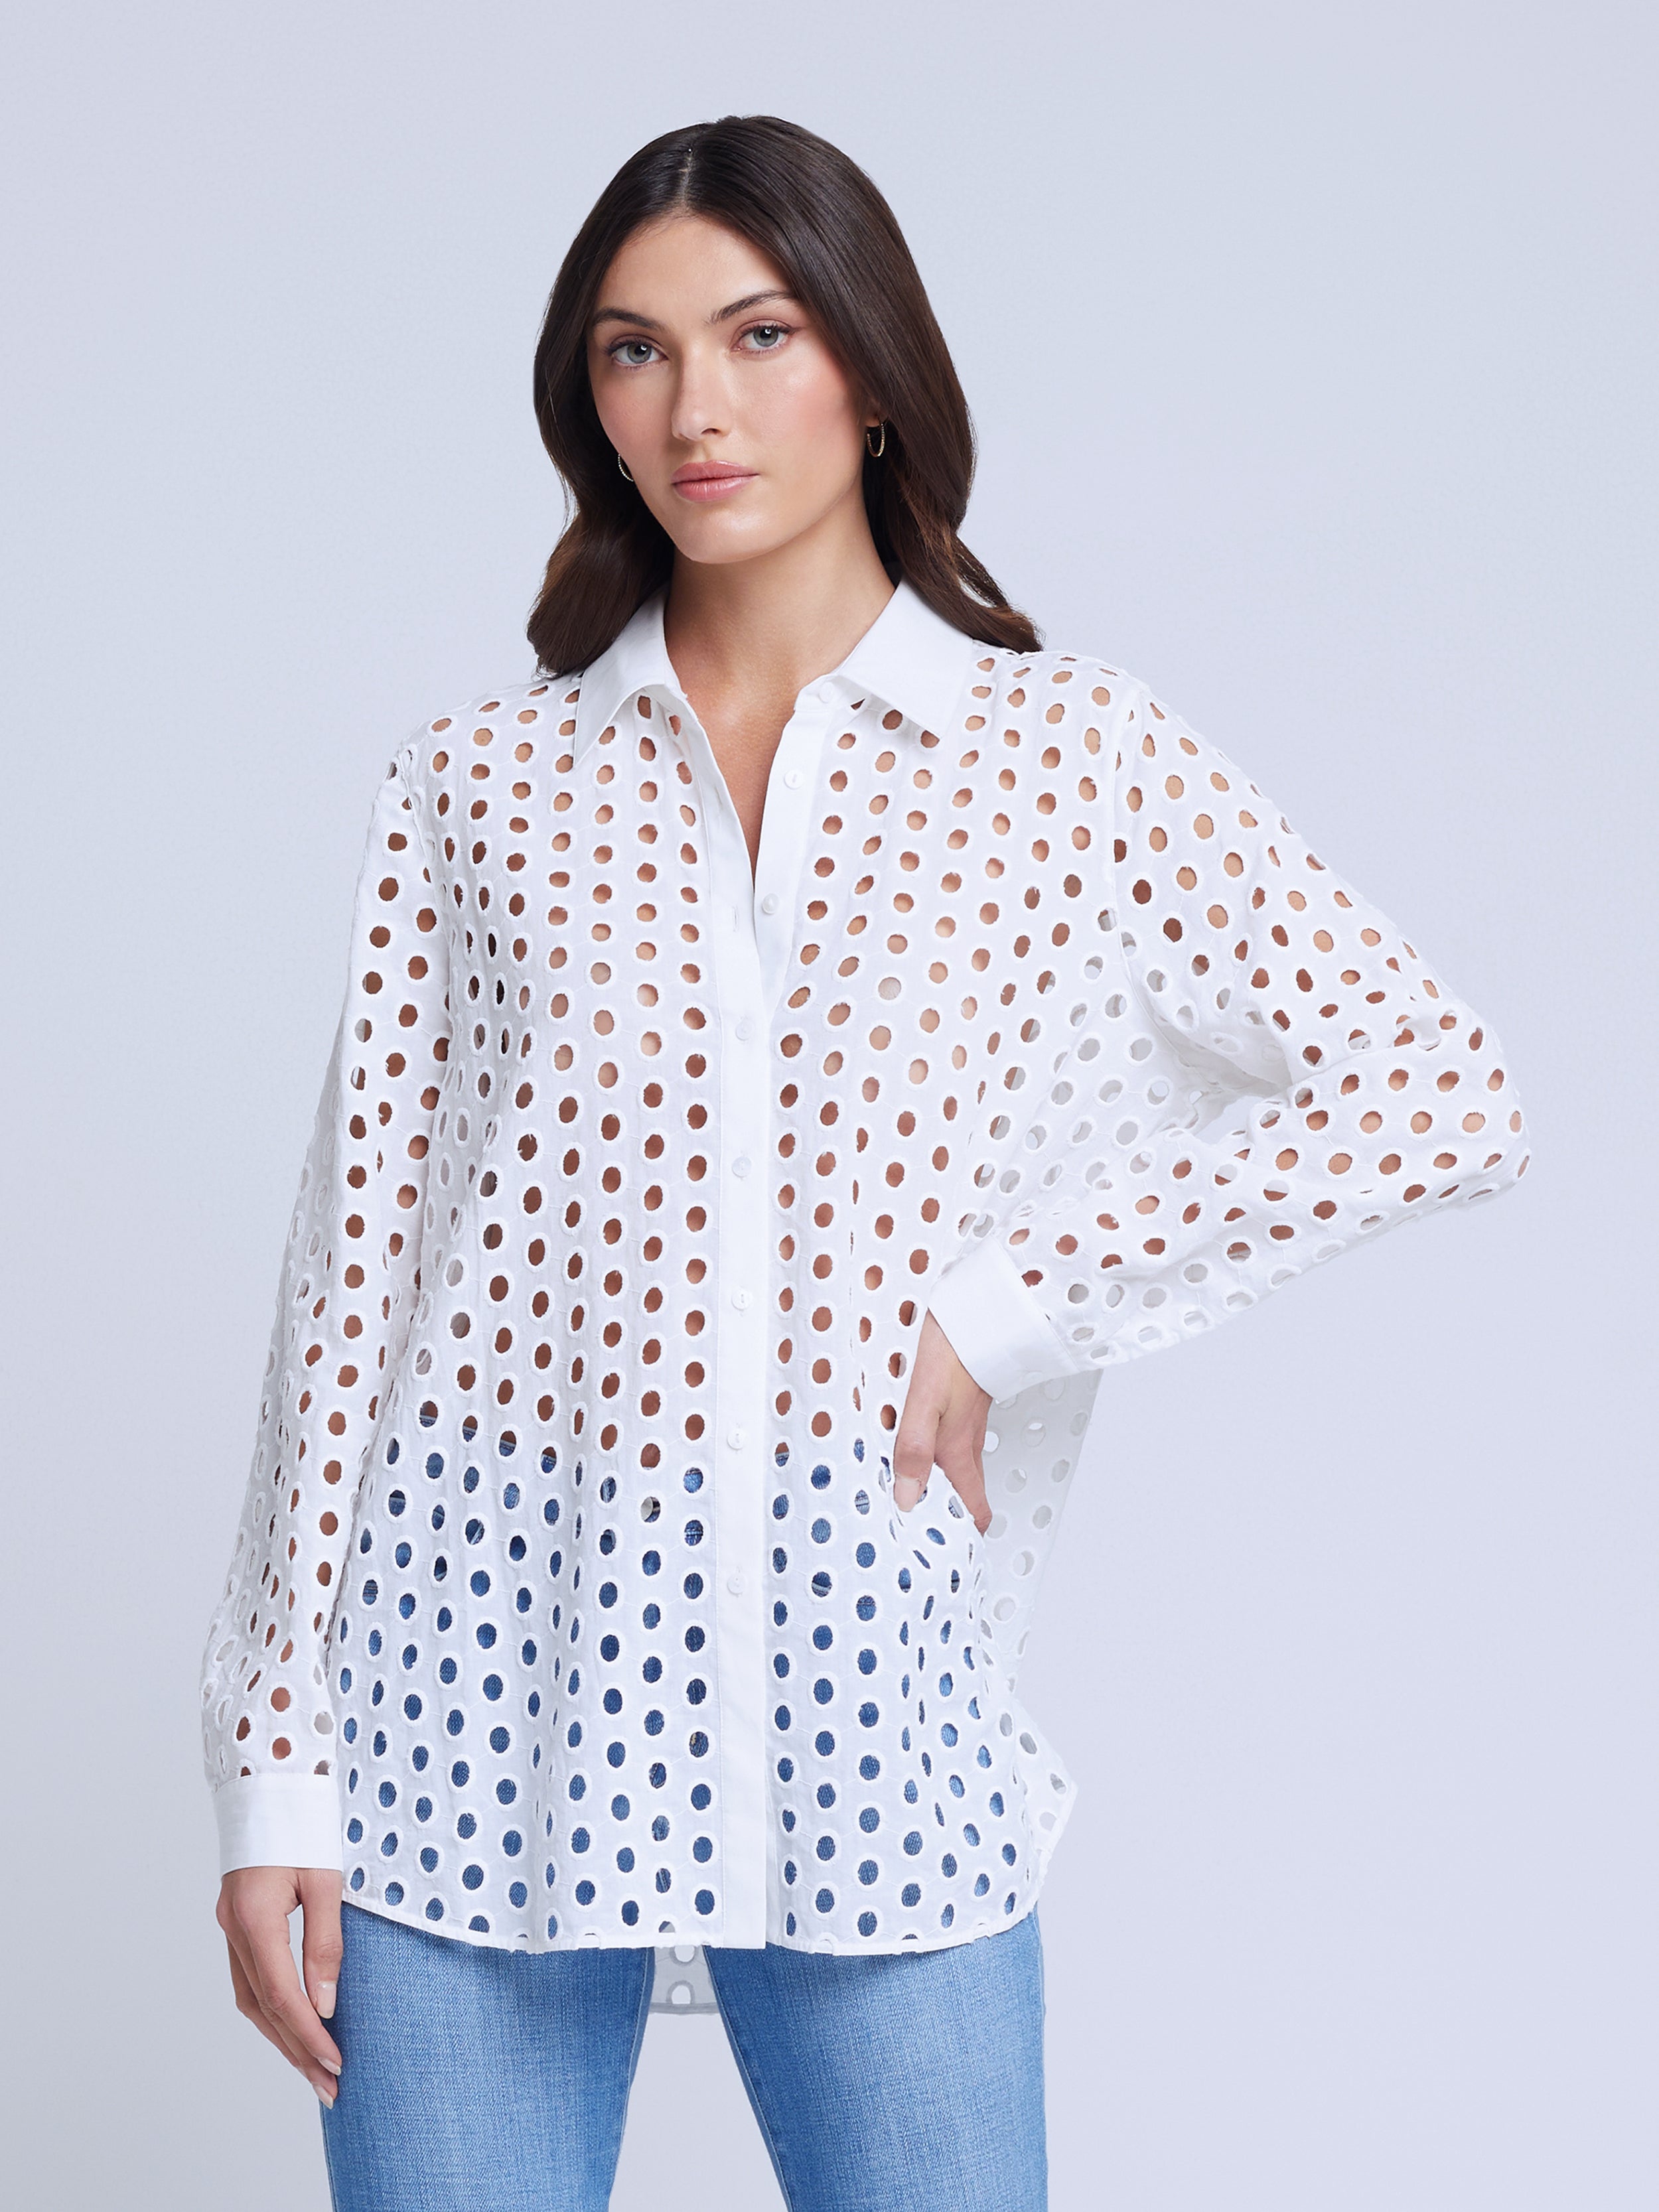 L'AGENCE Lindy Eyelet Blouse in White